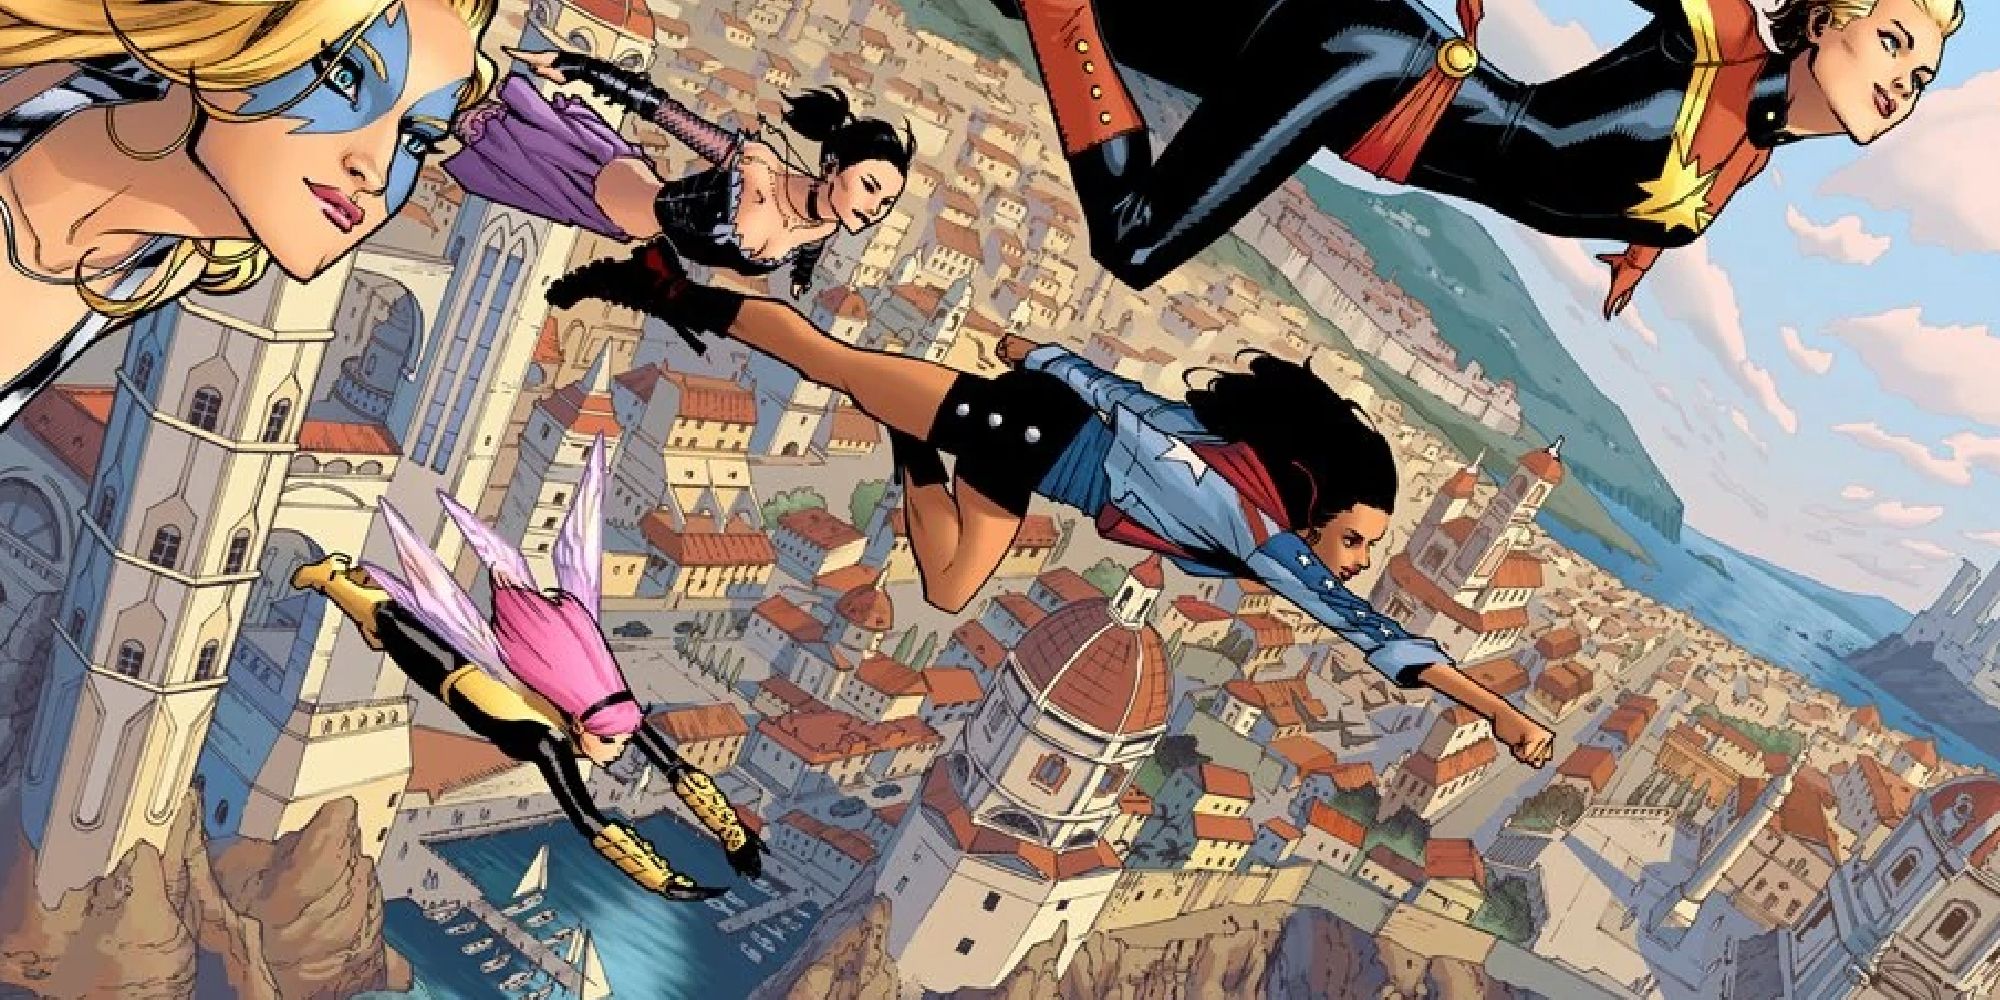 America Chavez flying through the air as part of A-Force with Carol Danvers, Kate Bishop, and Wasp